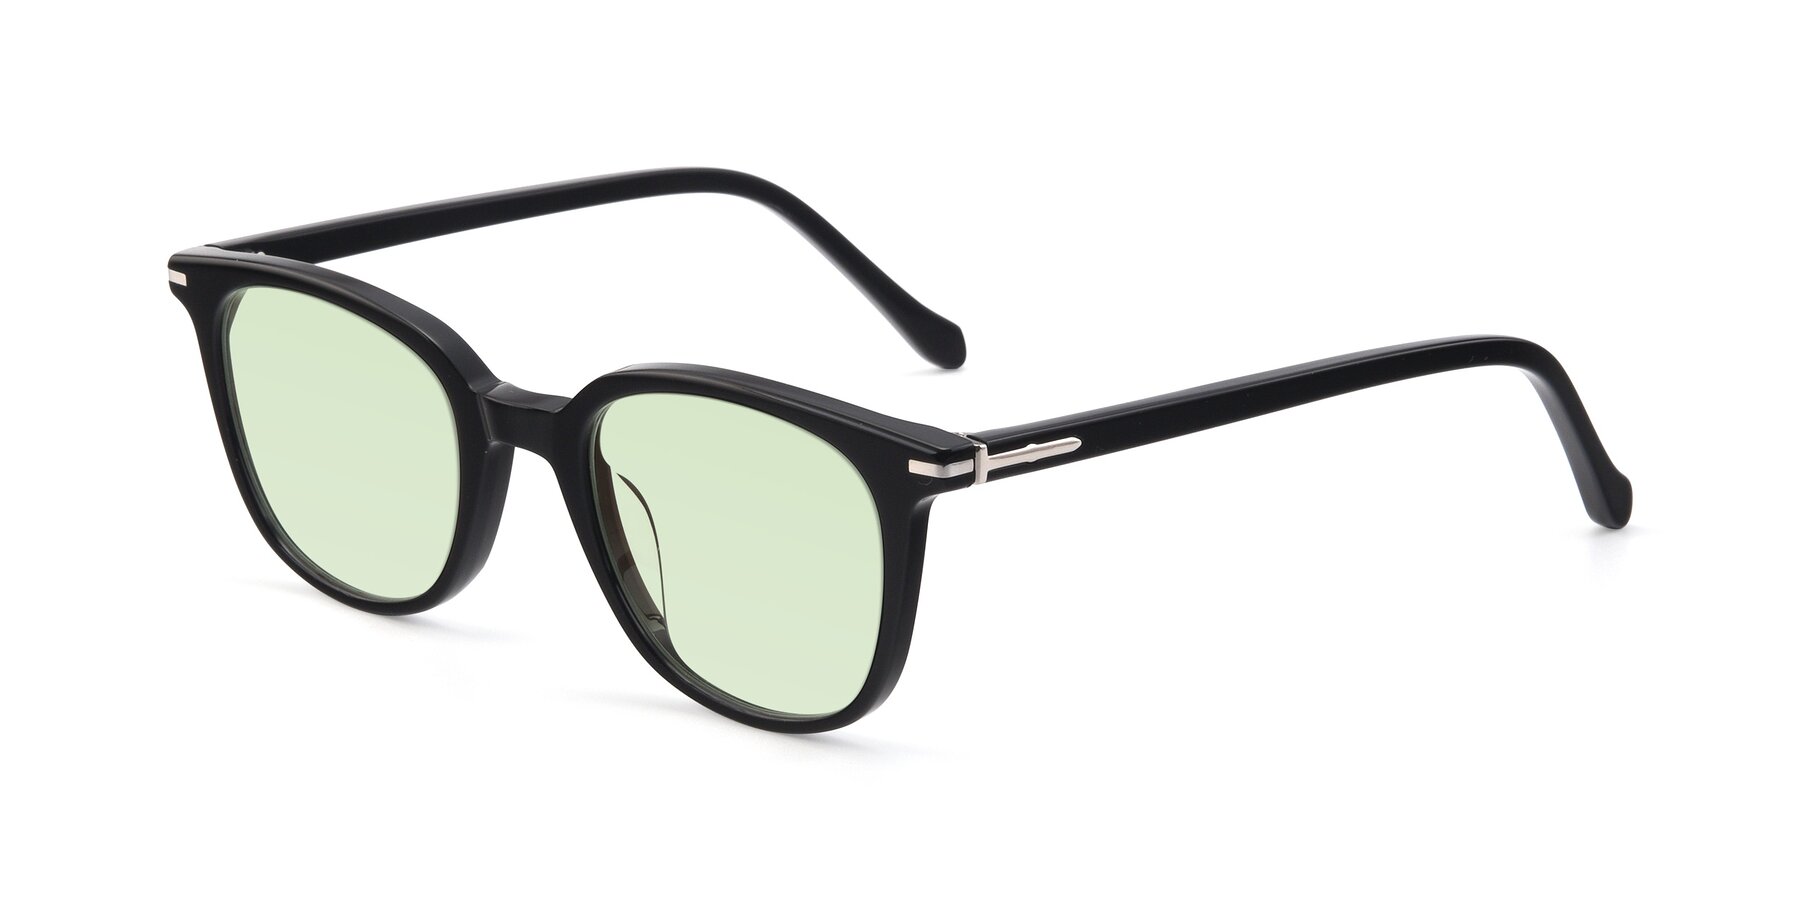 Angle of 17562 in Black with Light Green Tinted Lenses